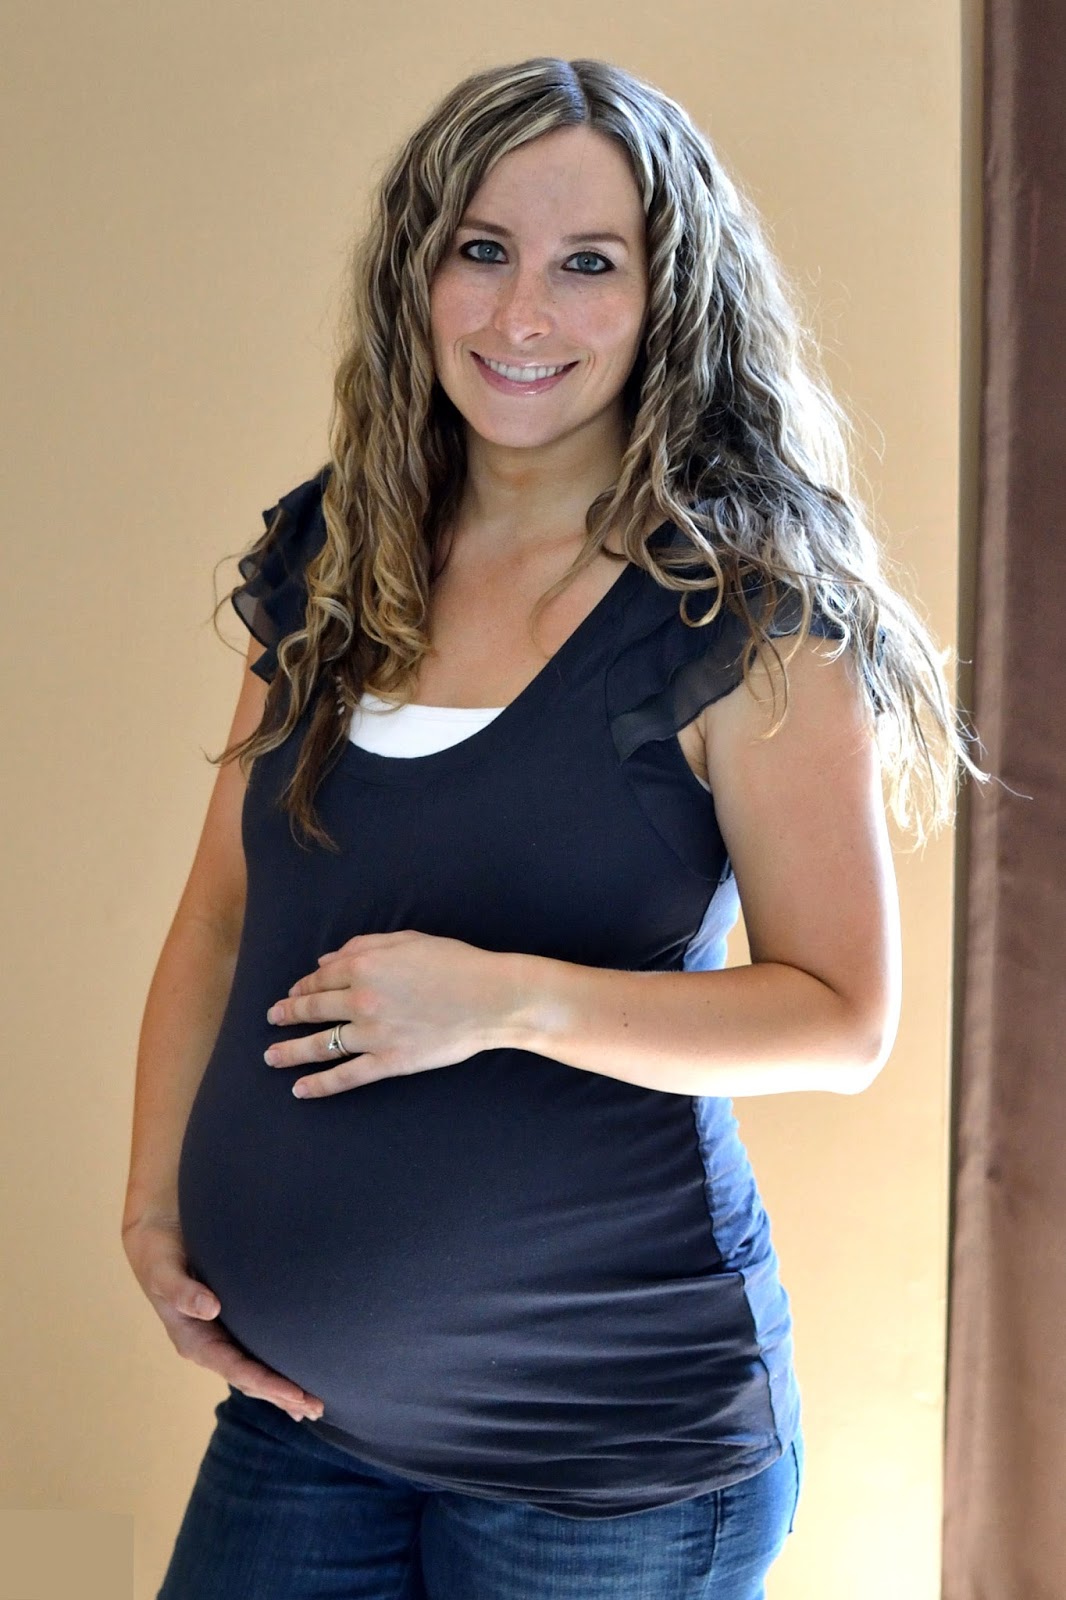 Ashley's Green Life: Tips on Finding Peace in Pregnancy Weight Gain